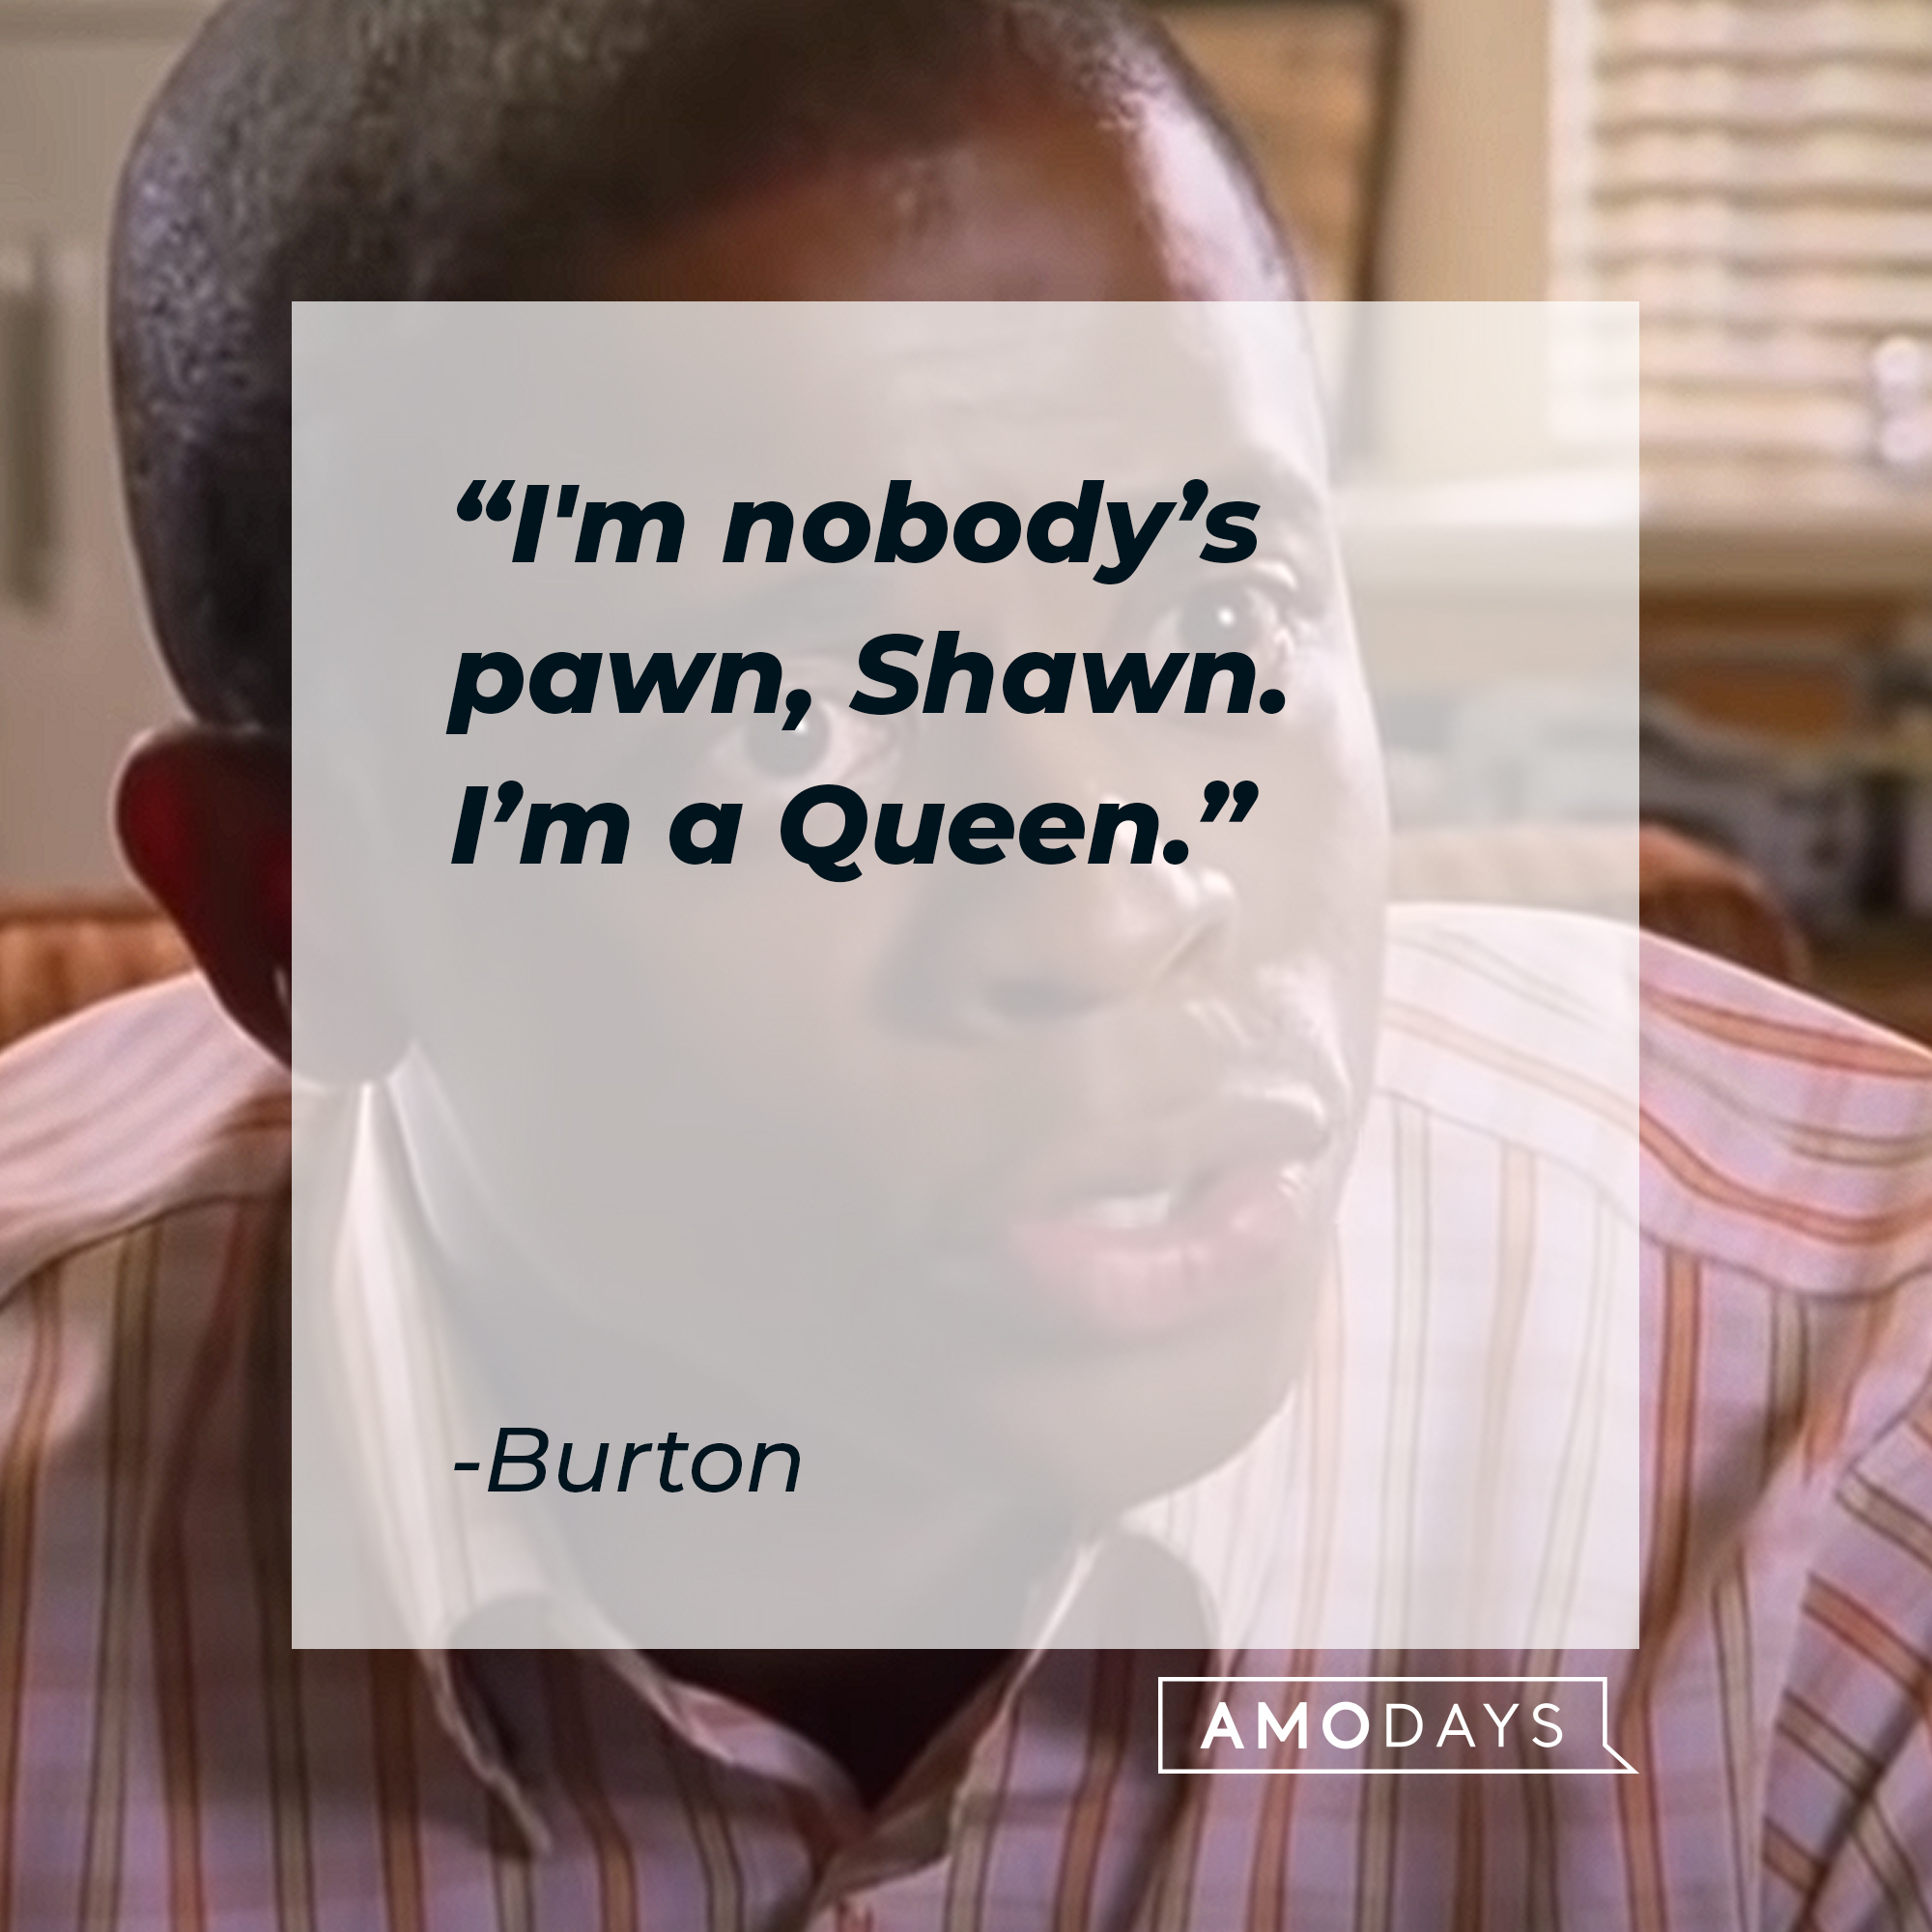 Burton's quote: "I'm nobody's pawn, Shawn. I'm a Queen." | Source: youtube.com/Psych